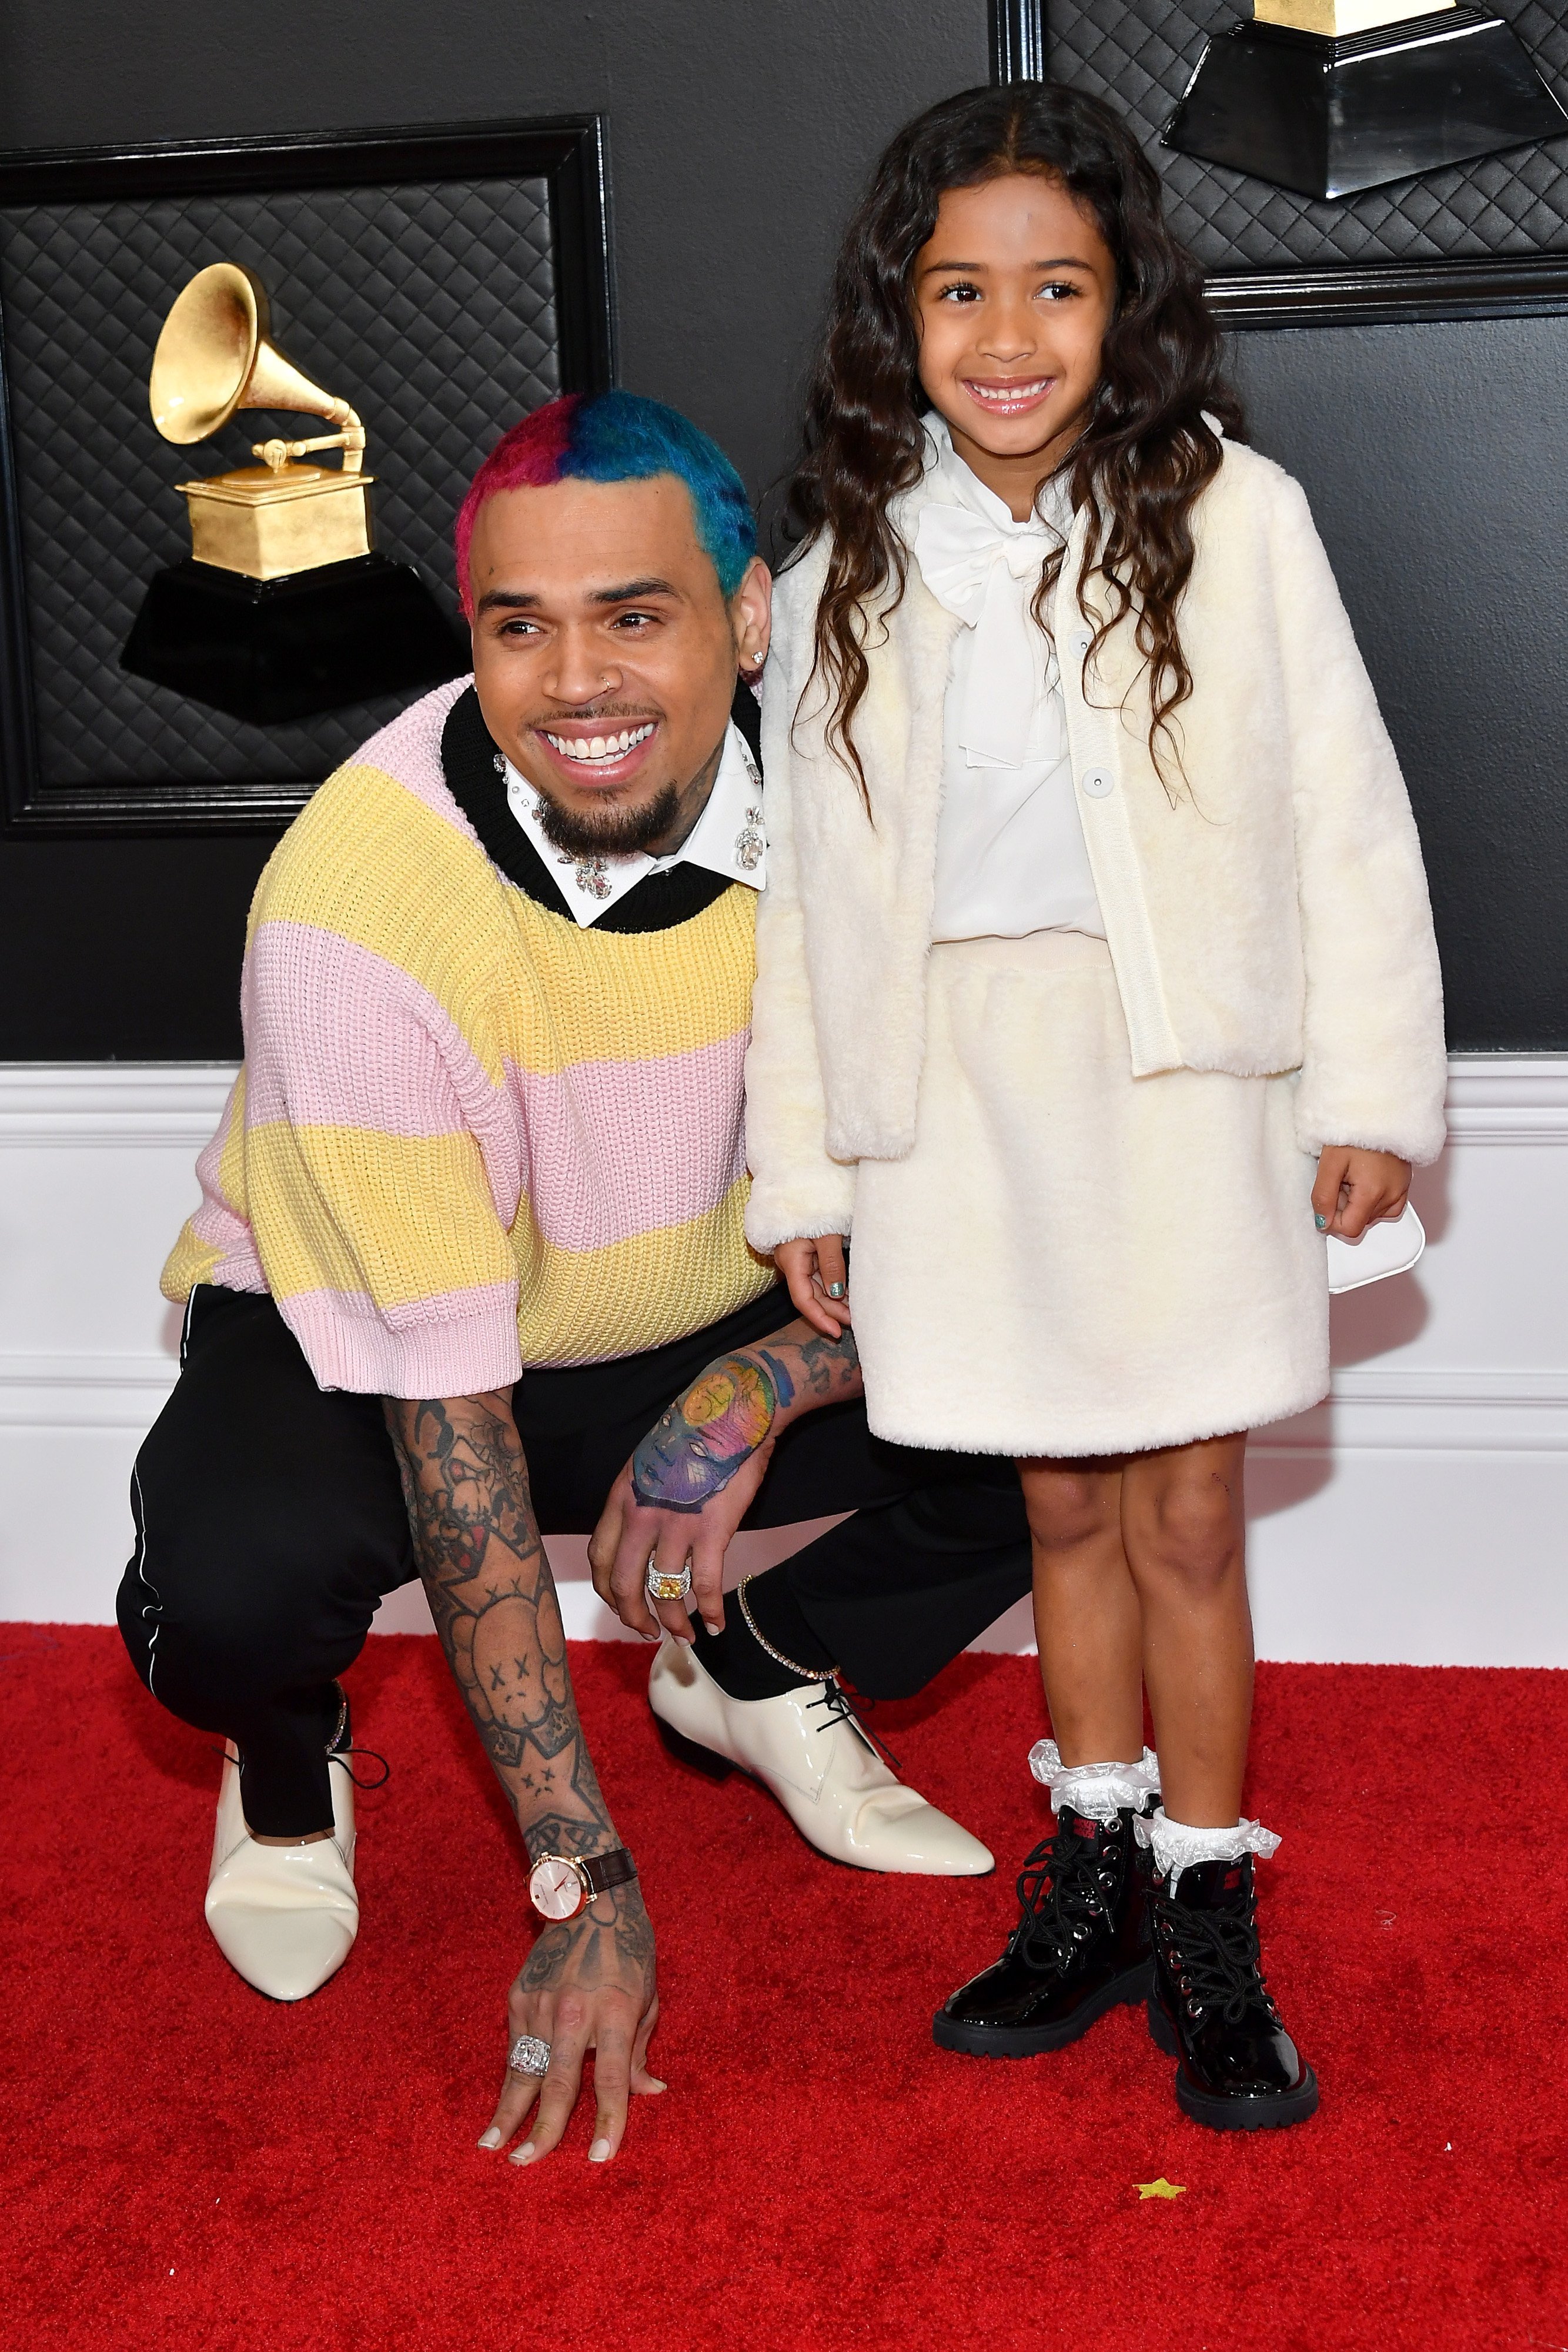 Chris Brown and his daughter, Royalty at the red carpet of the Grammy Awards in January 2020. | Photo: Getty Image